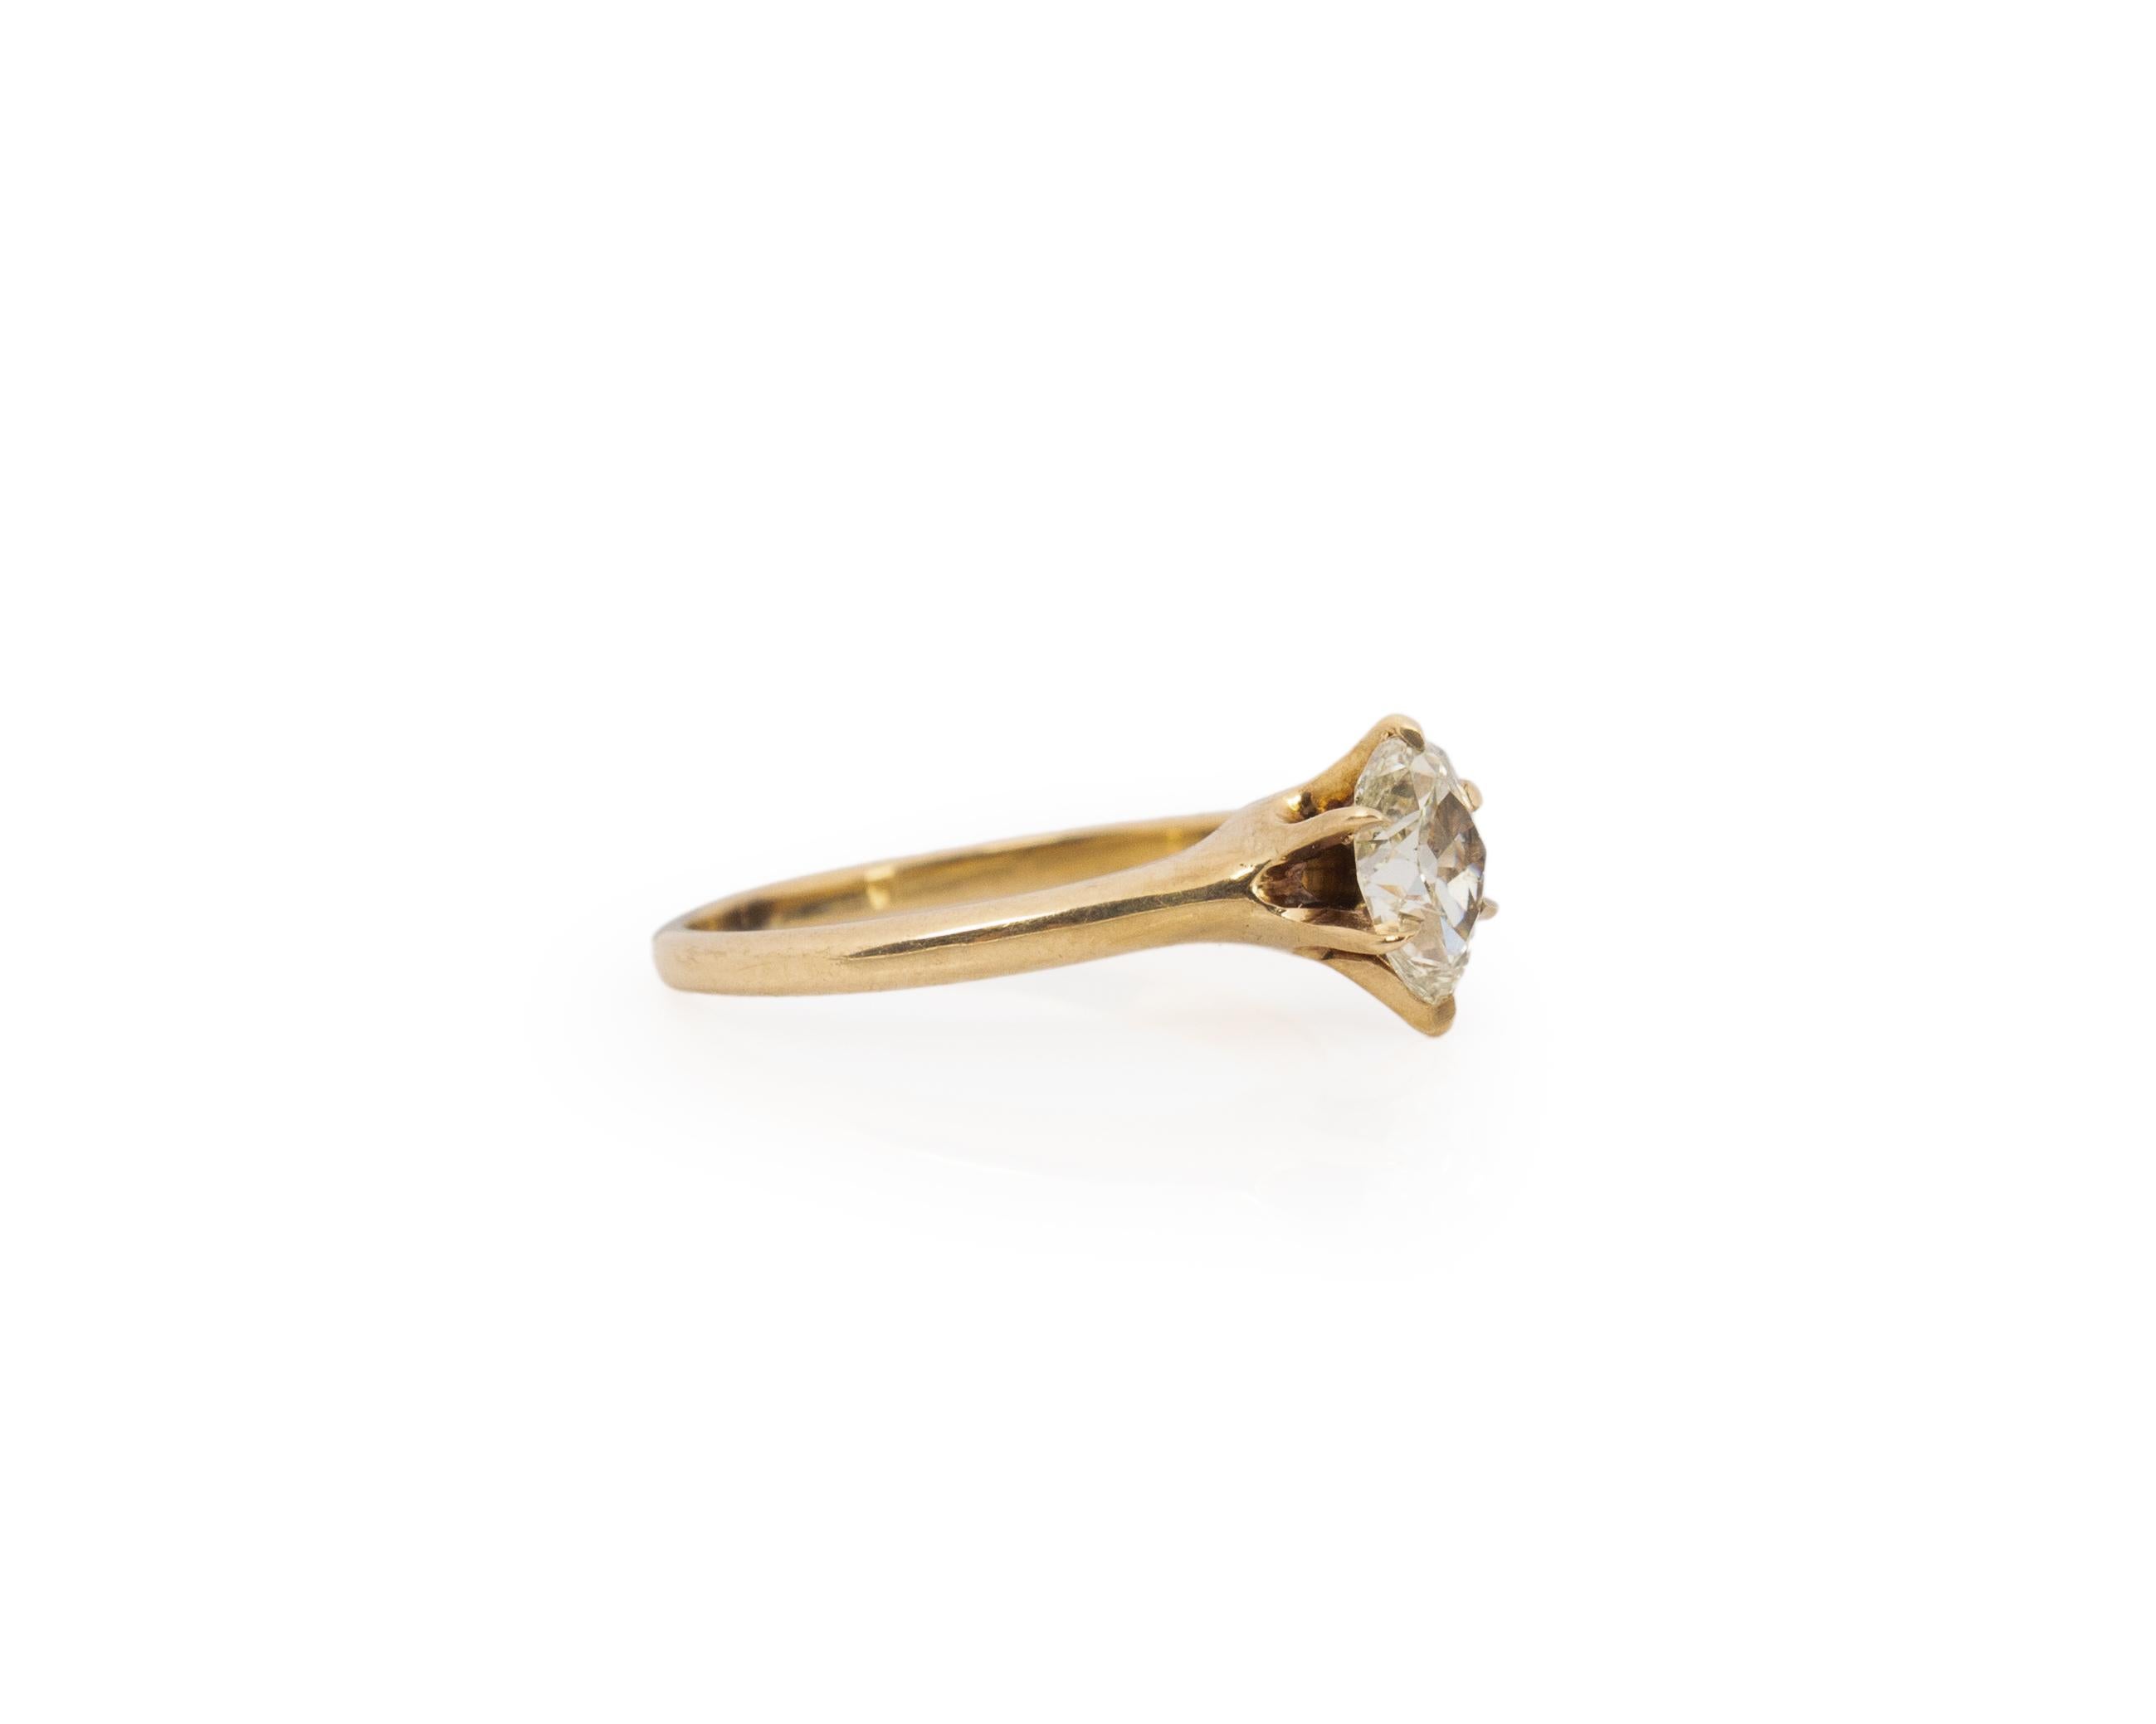 Ring Size: 4.5
Metal Type: 14K Yellow Gold [Hallmarked, and Tested]
Weight: grams

Center Diamond Details:
Weight: .55ct
Cut: Old European brilliant
Color: J
Clarity: SI1

Finger to Top of Stone Measurement: 6.0mm
Shank/Band Width: 1.2mm
Condition: